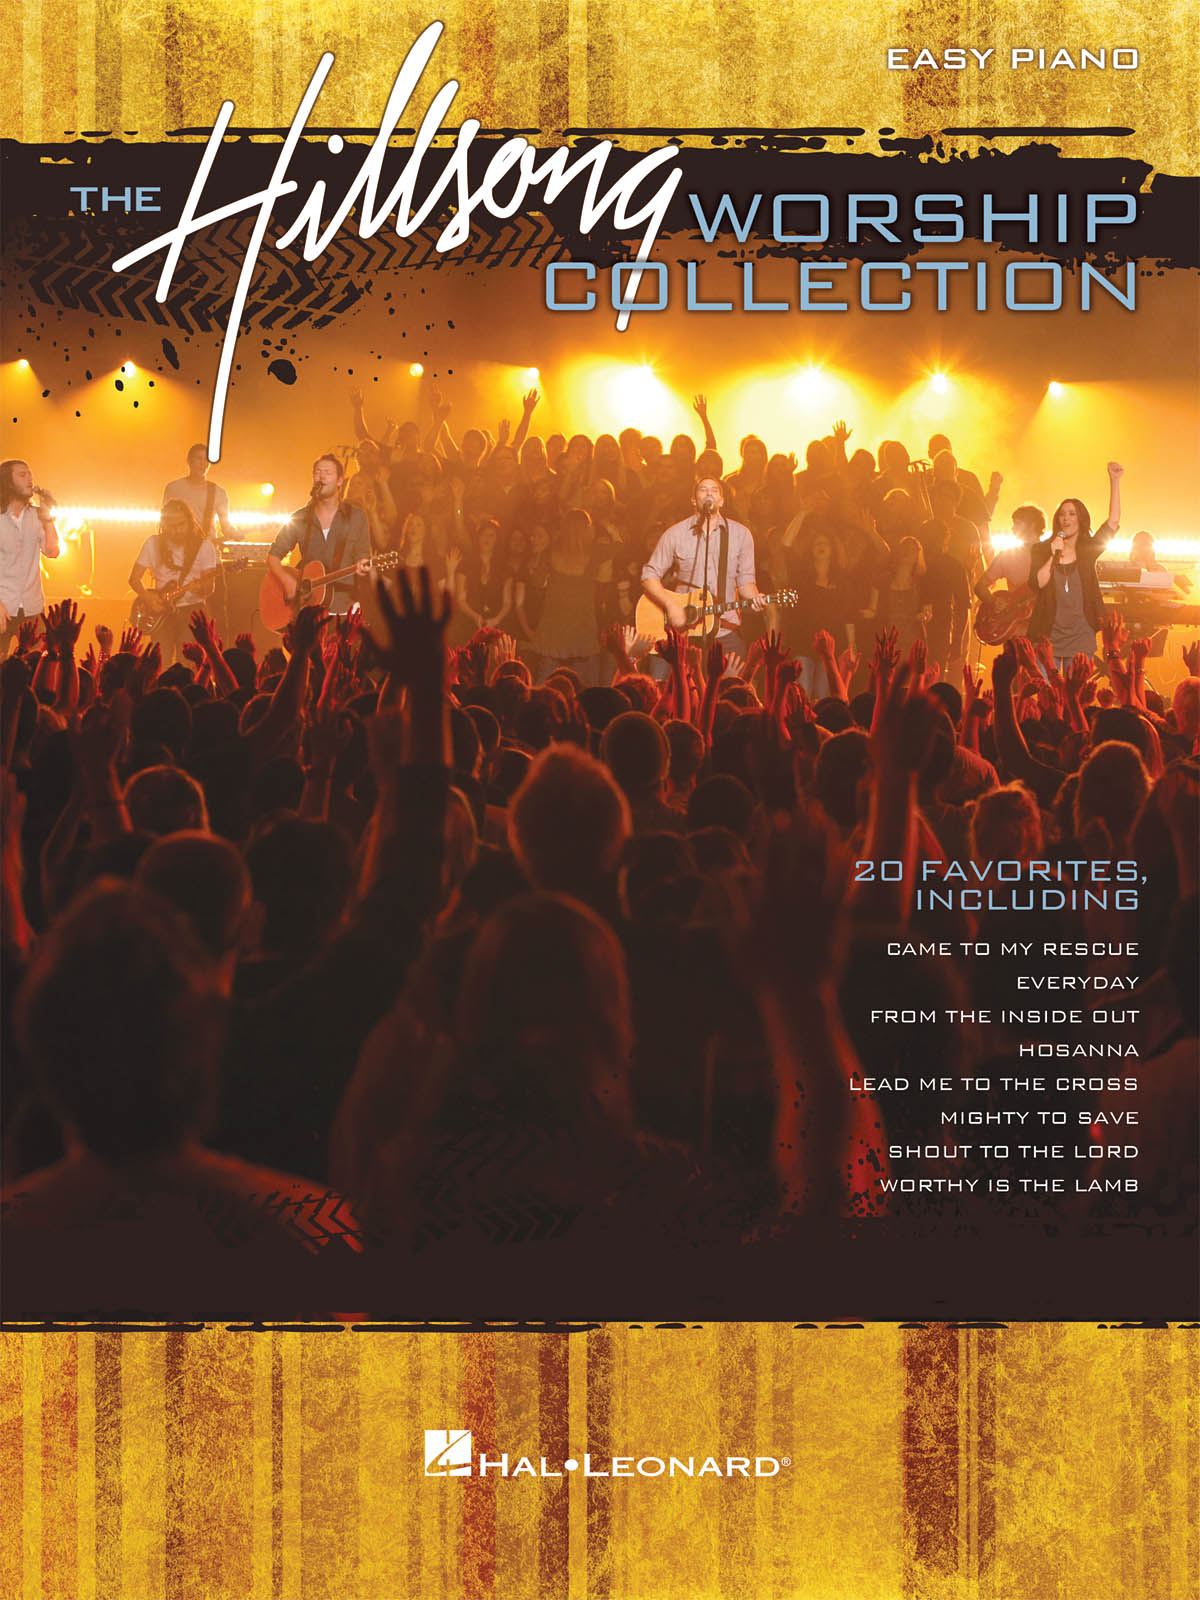 Hillsong: The Hillsong Worship Collection: Easy Piano: Instrumental Album